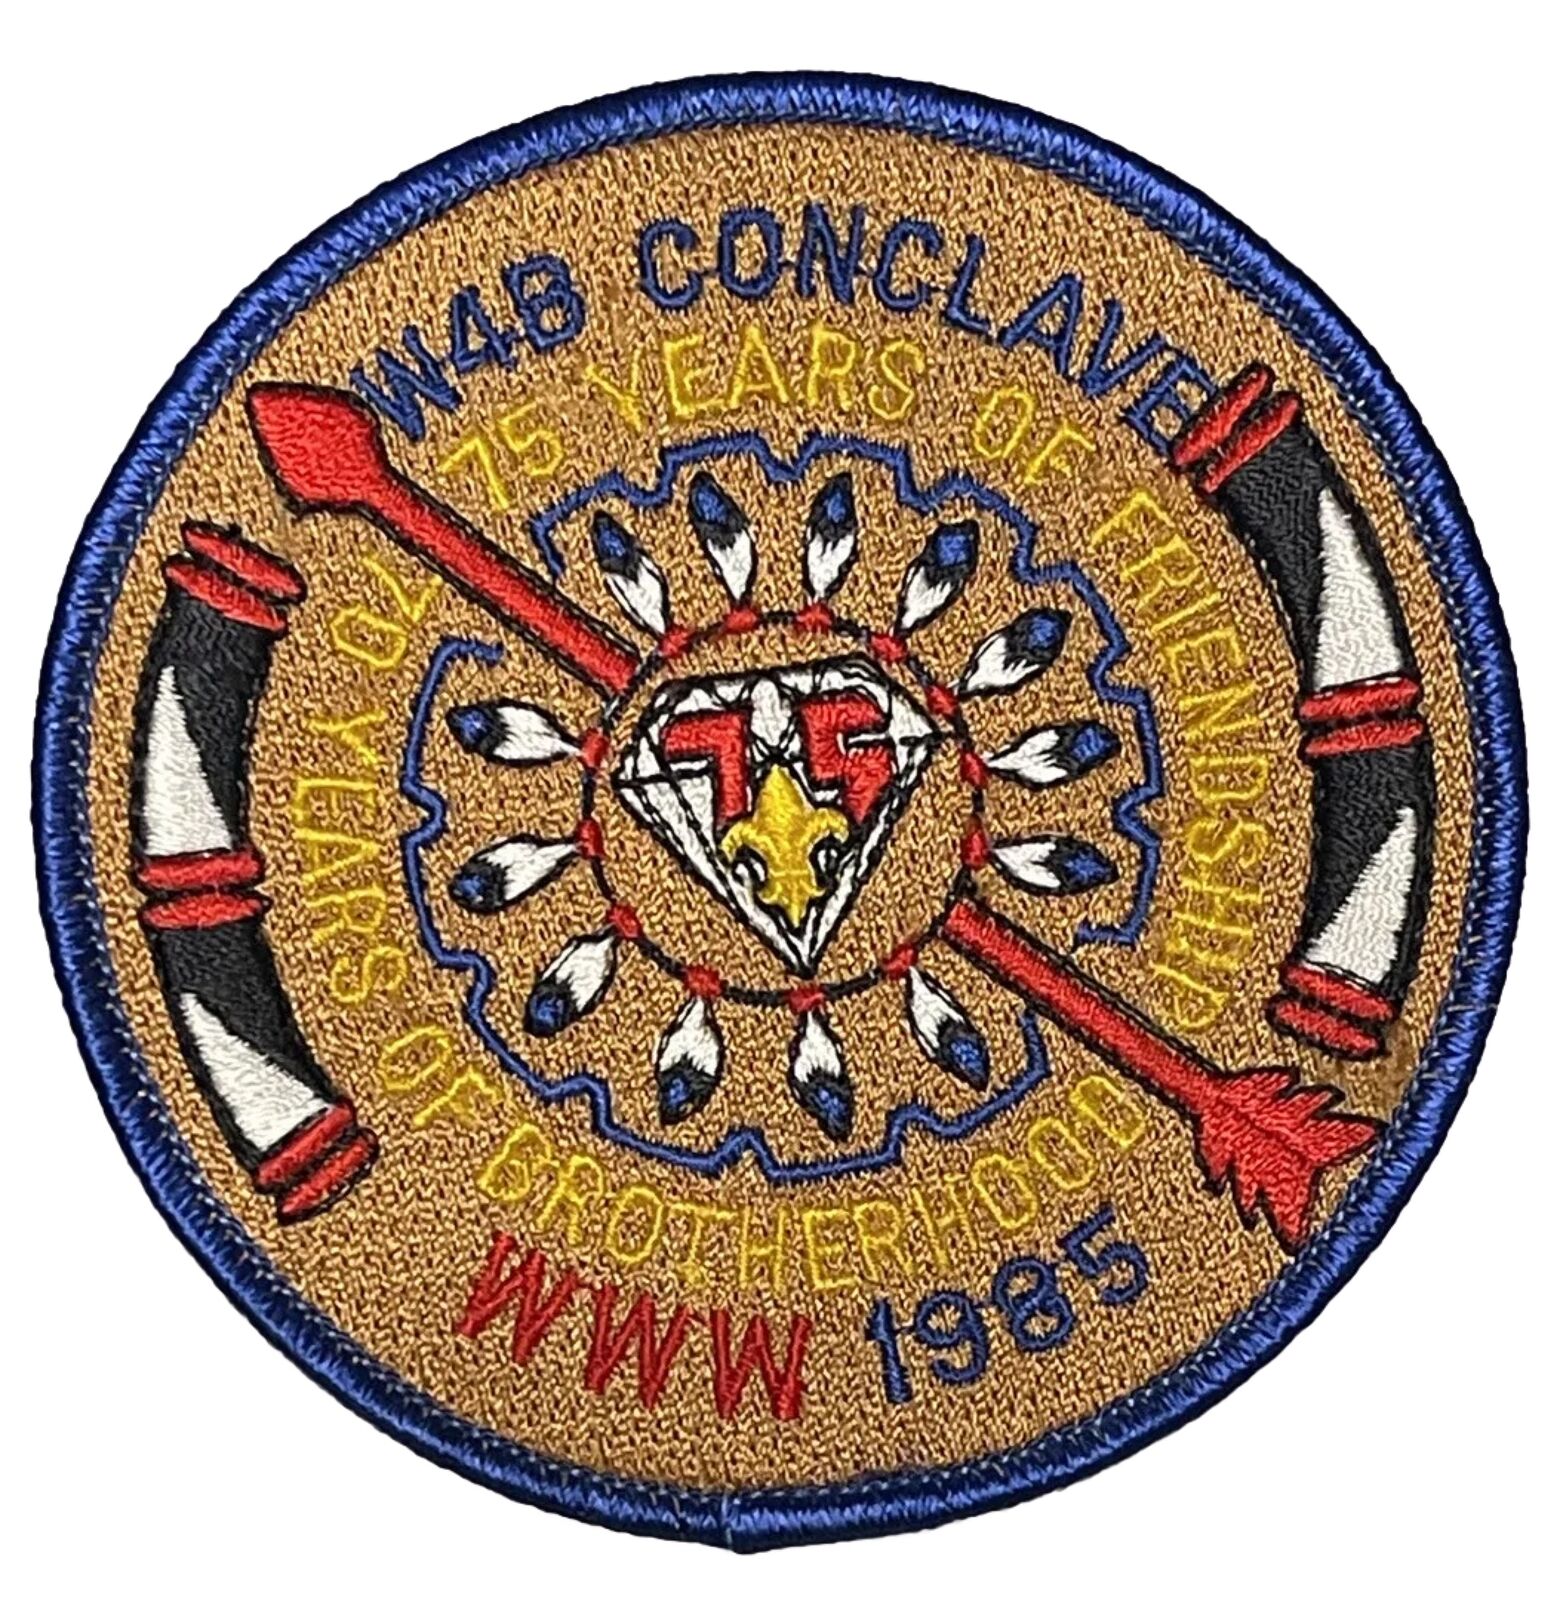 OA Patch W4B Conclave 75 Years Of Friendship 70 Years Of Brotherhood WWW 1985